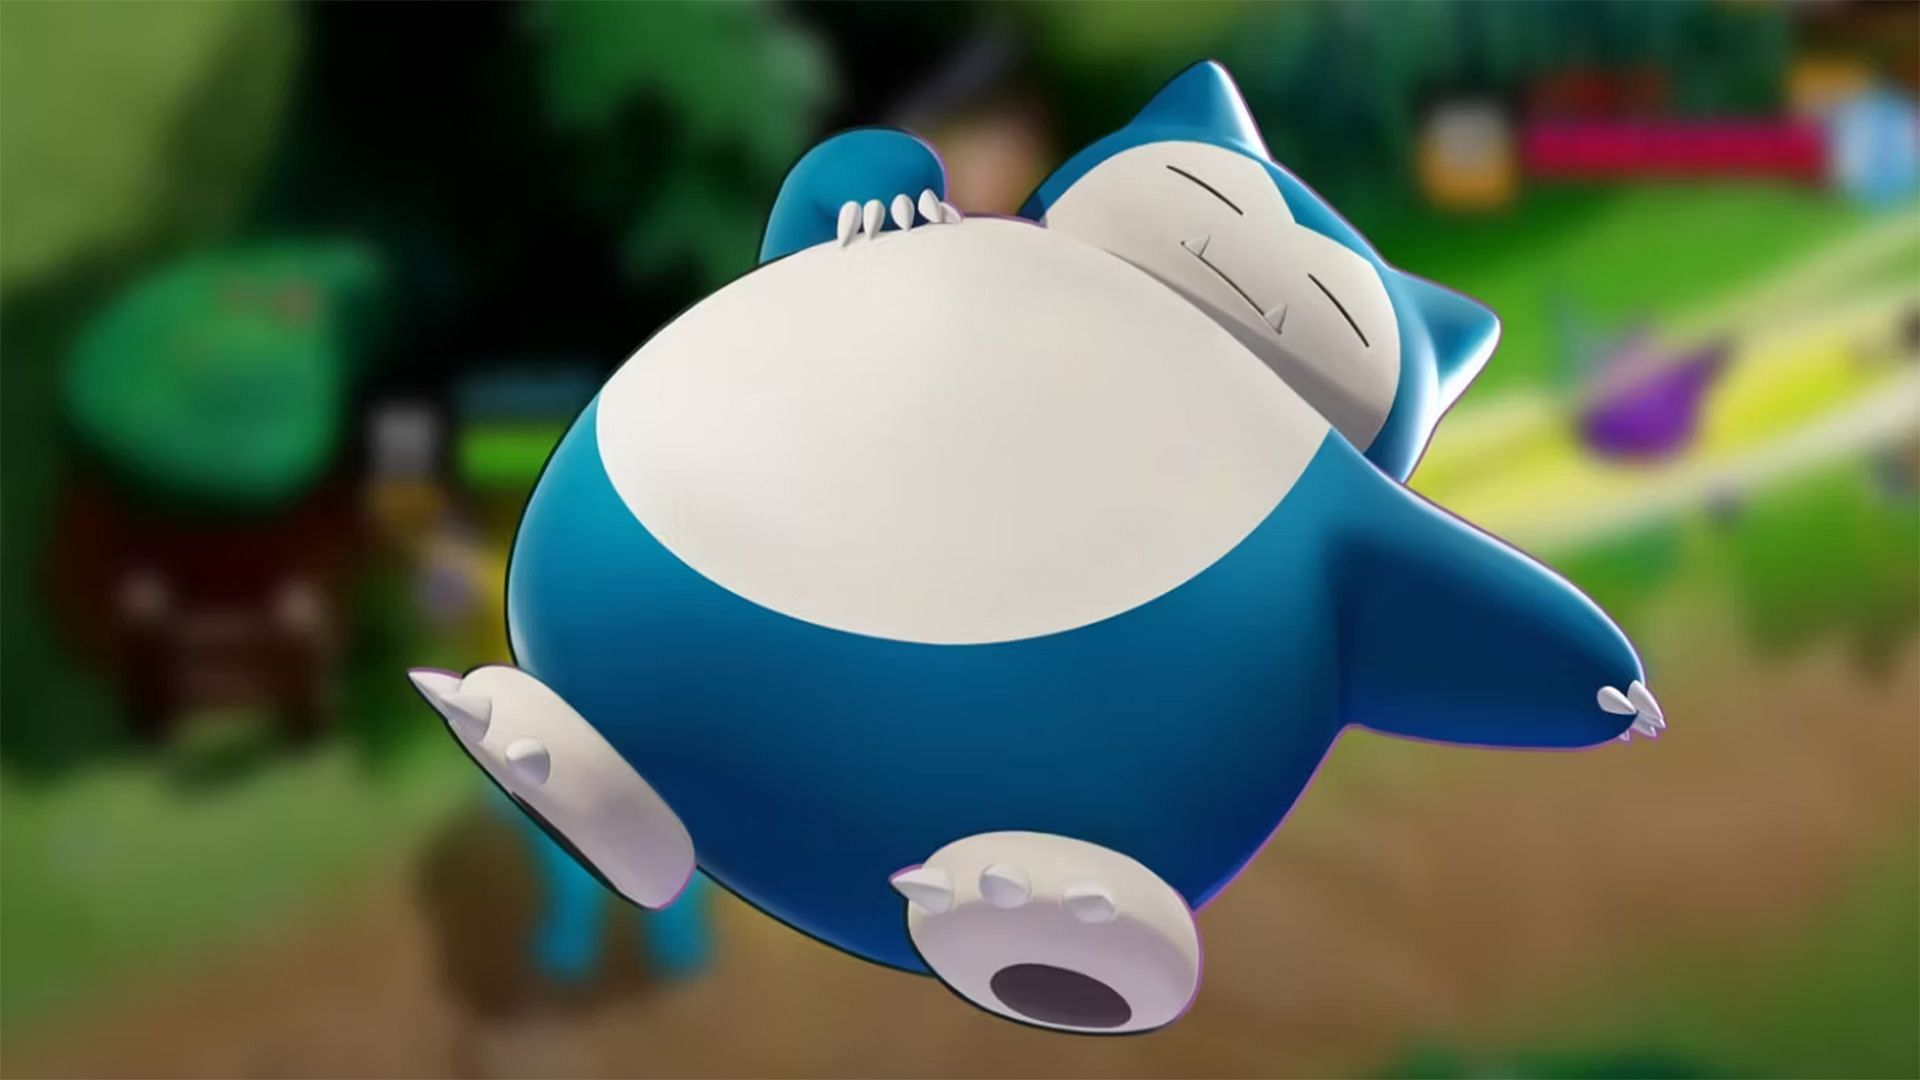 Snorlax sleeping in the game (Image via The Pokemon Company)